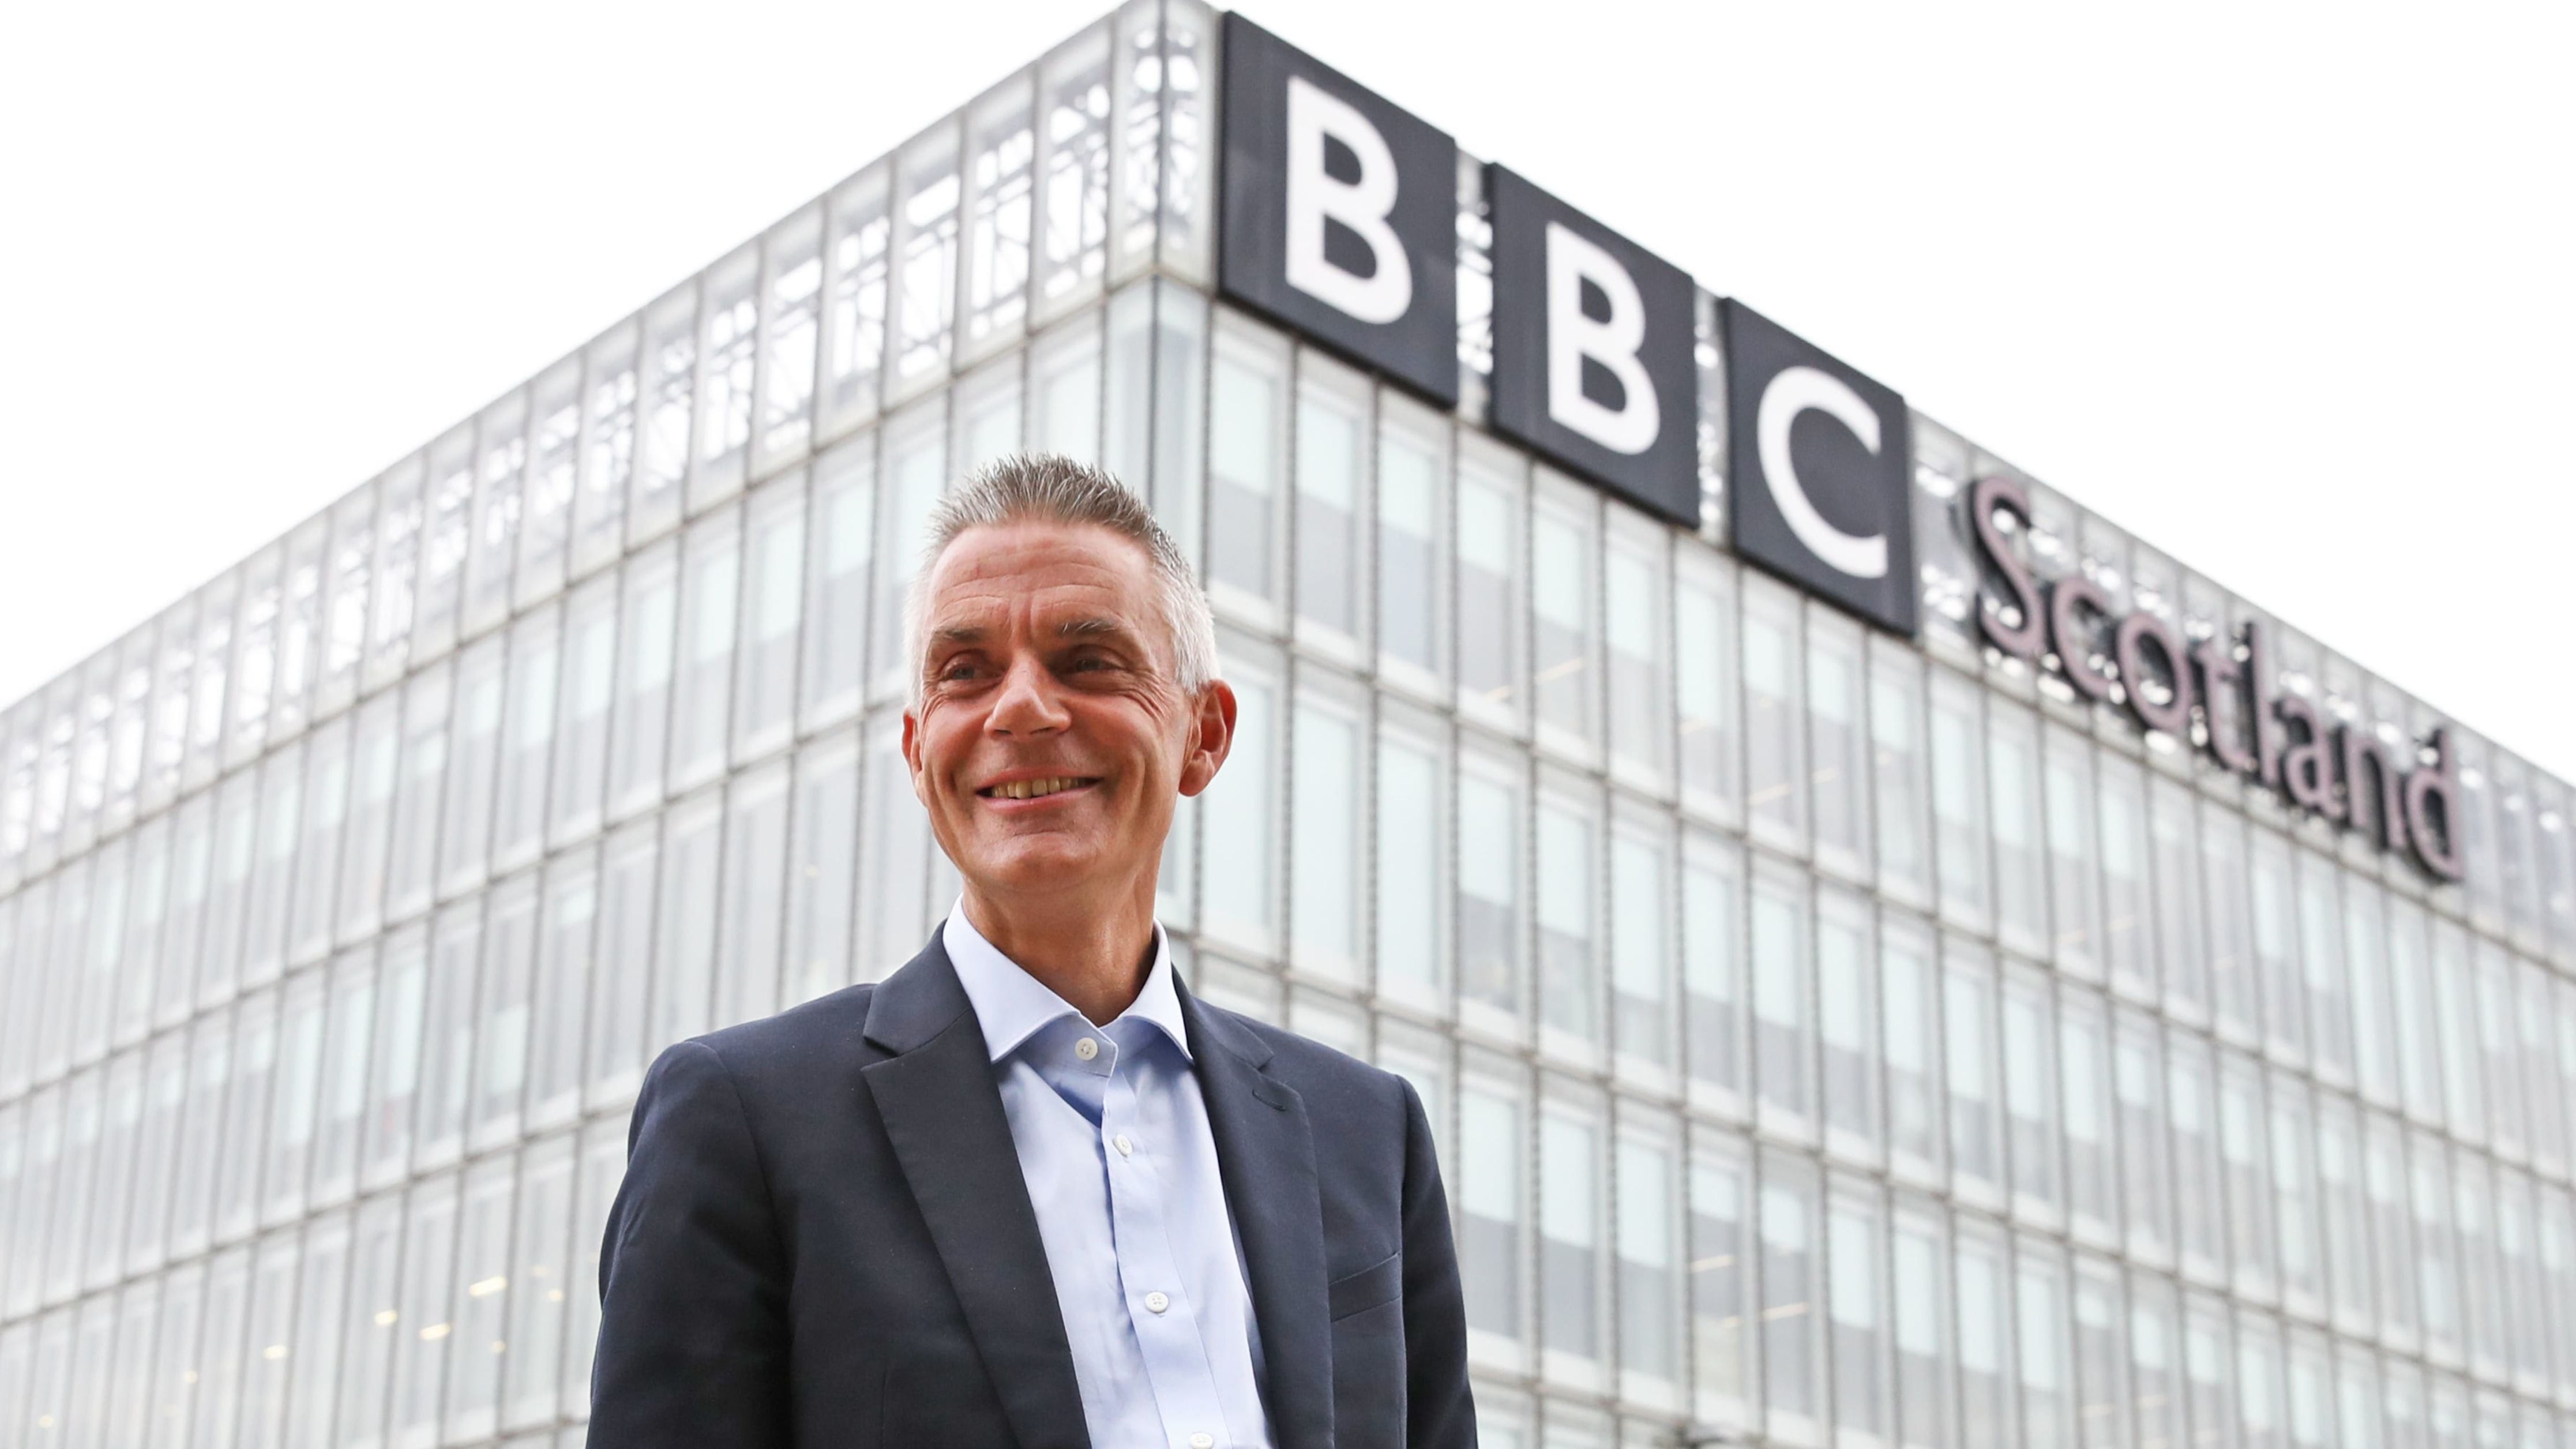 Tim Davie also said the BBC should be ‘healthily paranoid’ about its value.